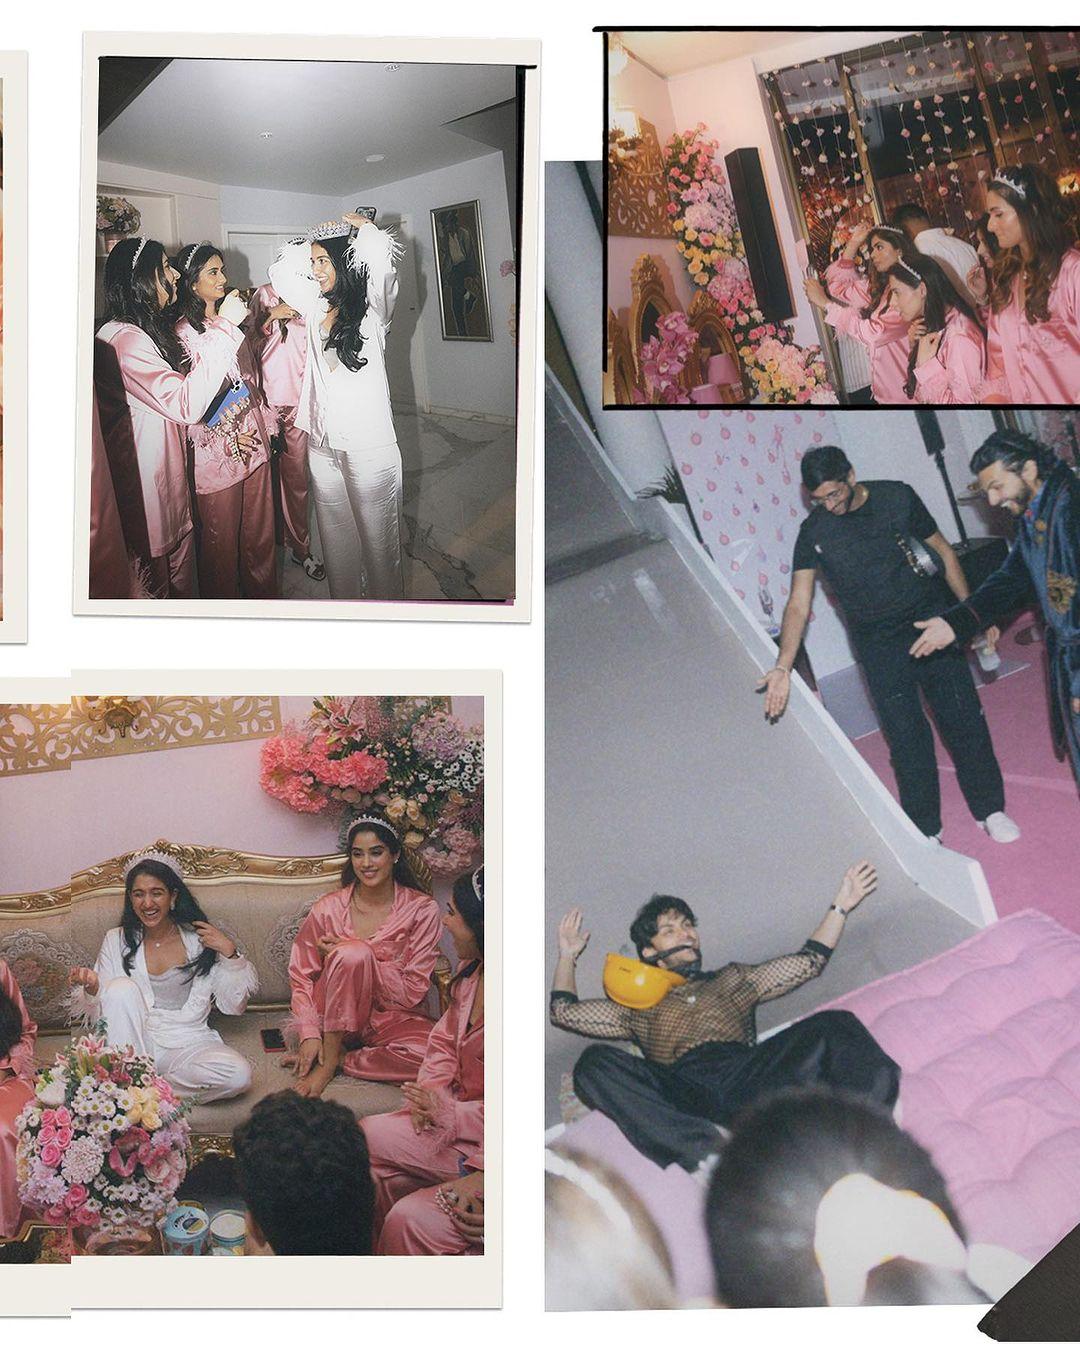 In this collage of four pics, we can see so much fun. One picture has Janhvi seated next to Radhika, while another has Shikhar enjoying the party. A picture shows Radhika adjusting her crown